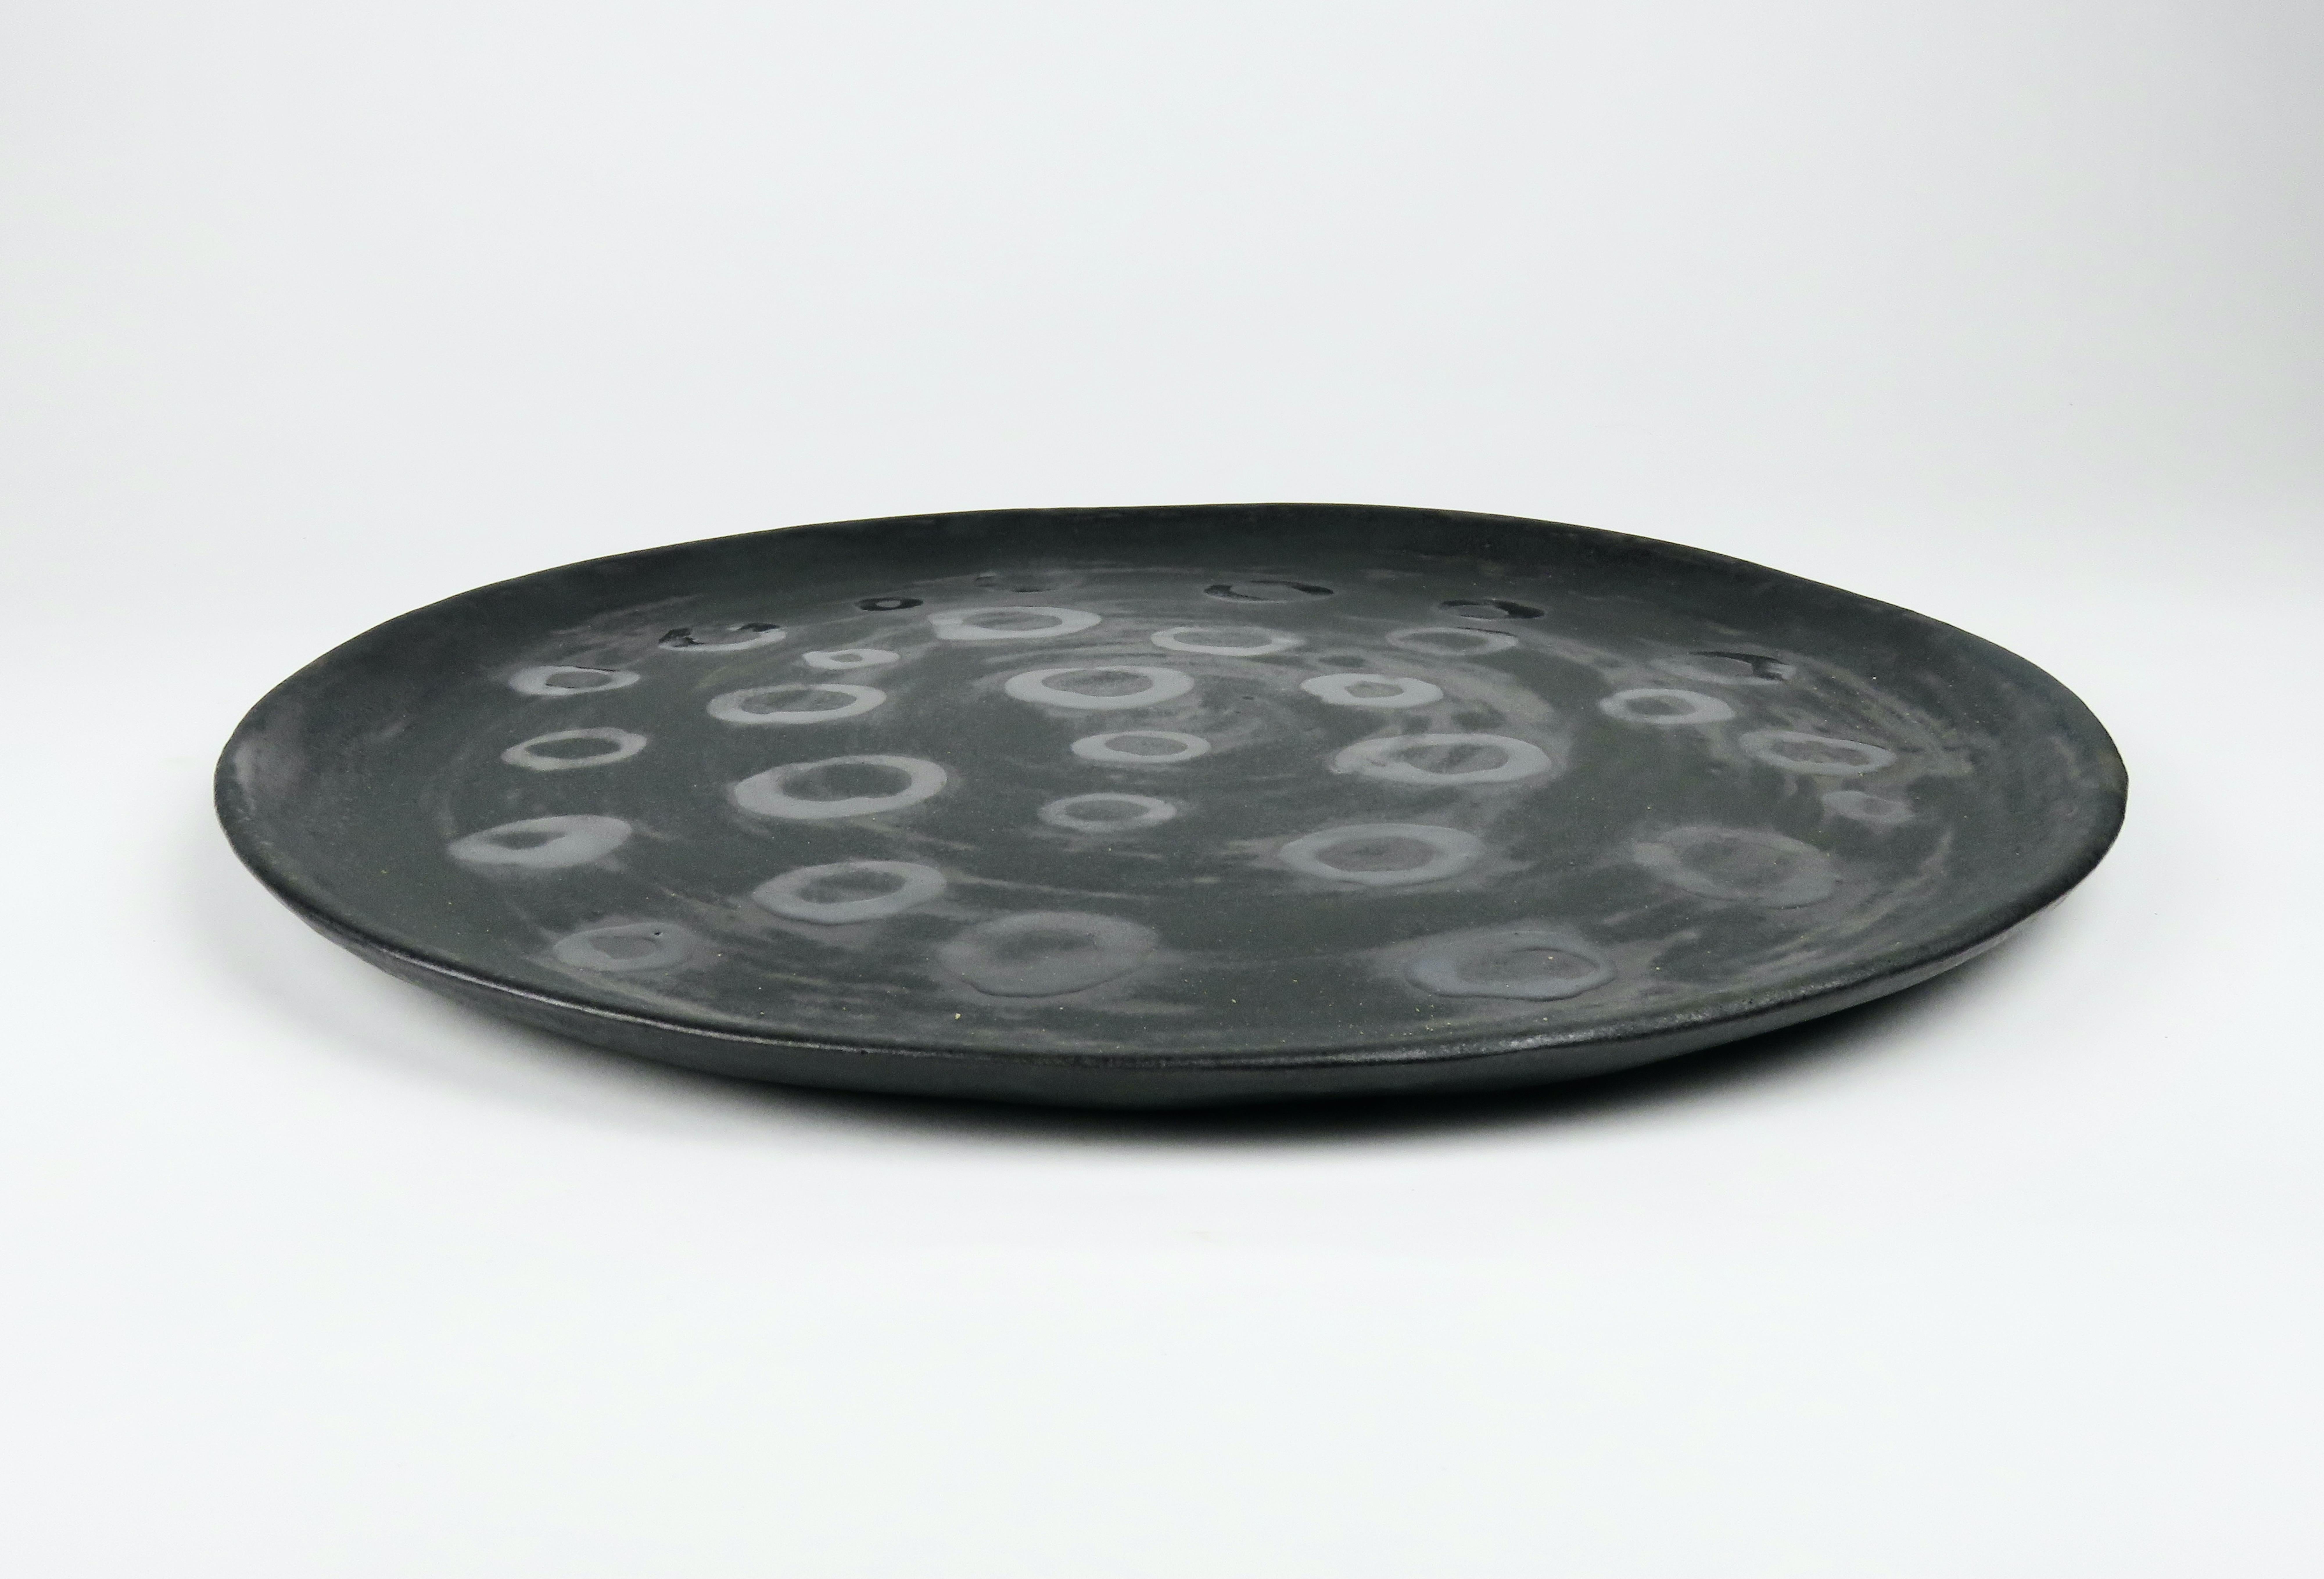 Hand-Painted Large Flat Black Hand Built Ceramic Platter with Metallic Details For Sale